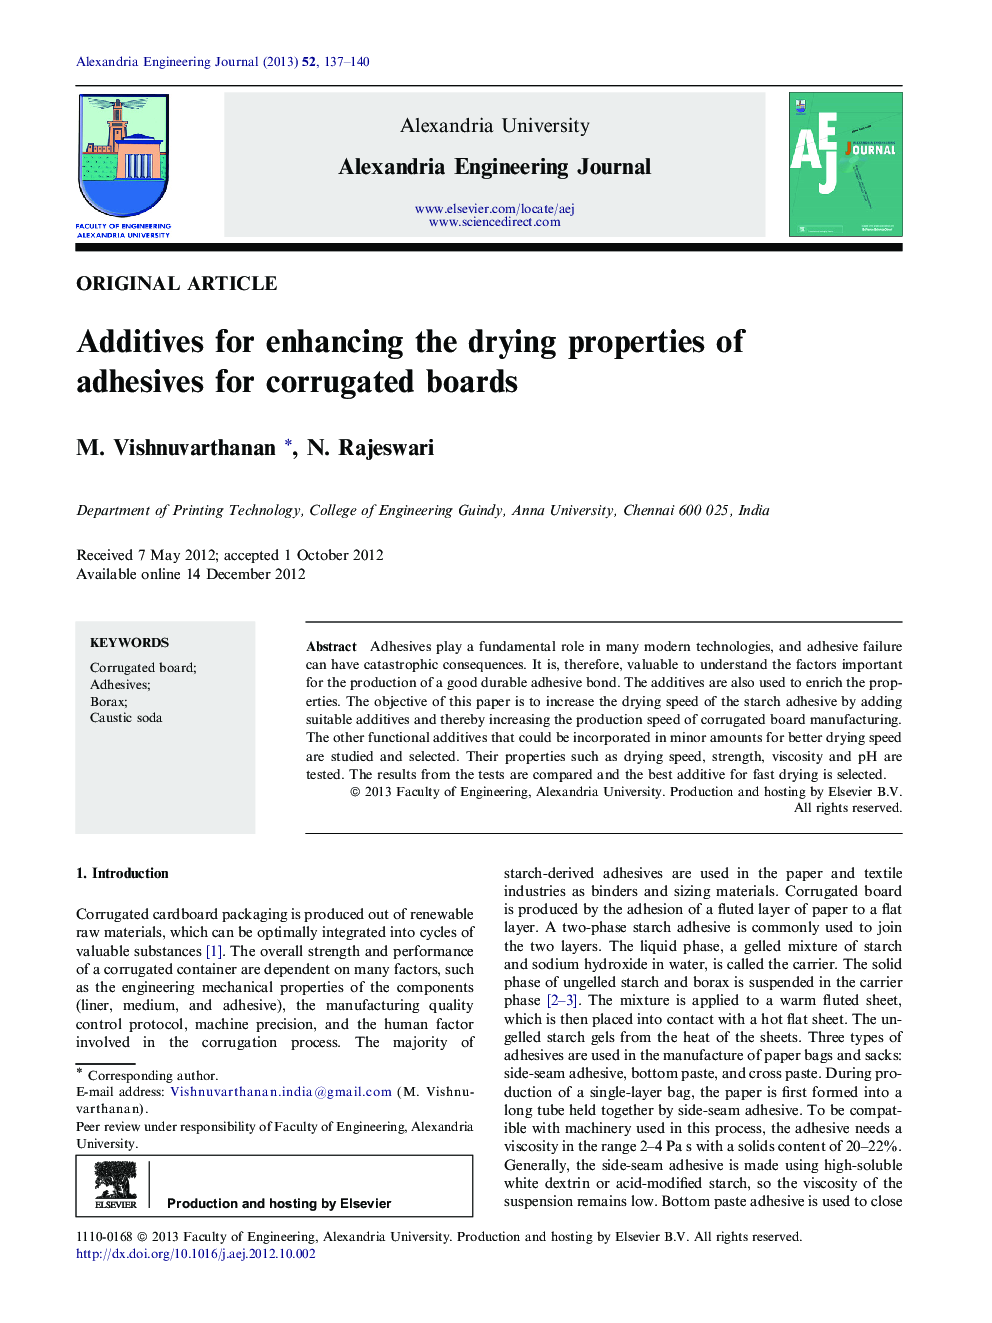 Additives for enhancing the drying properties of adhesives for corrugated boards 